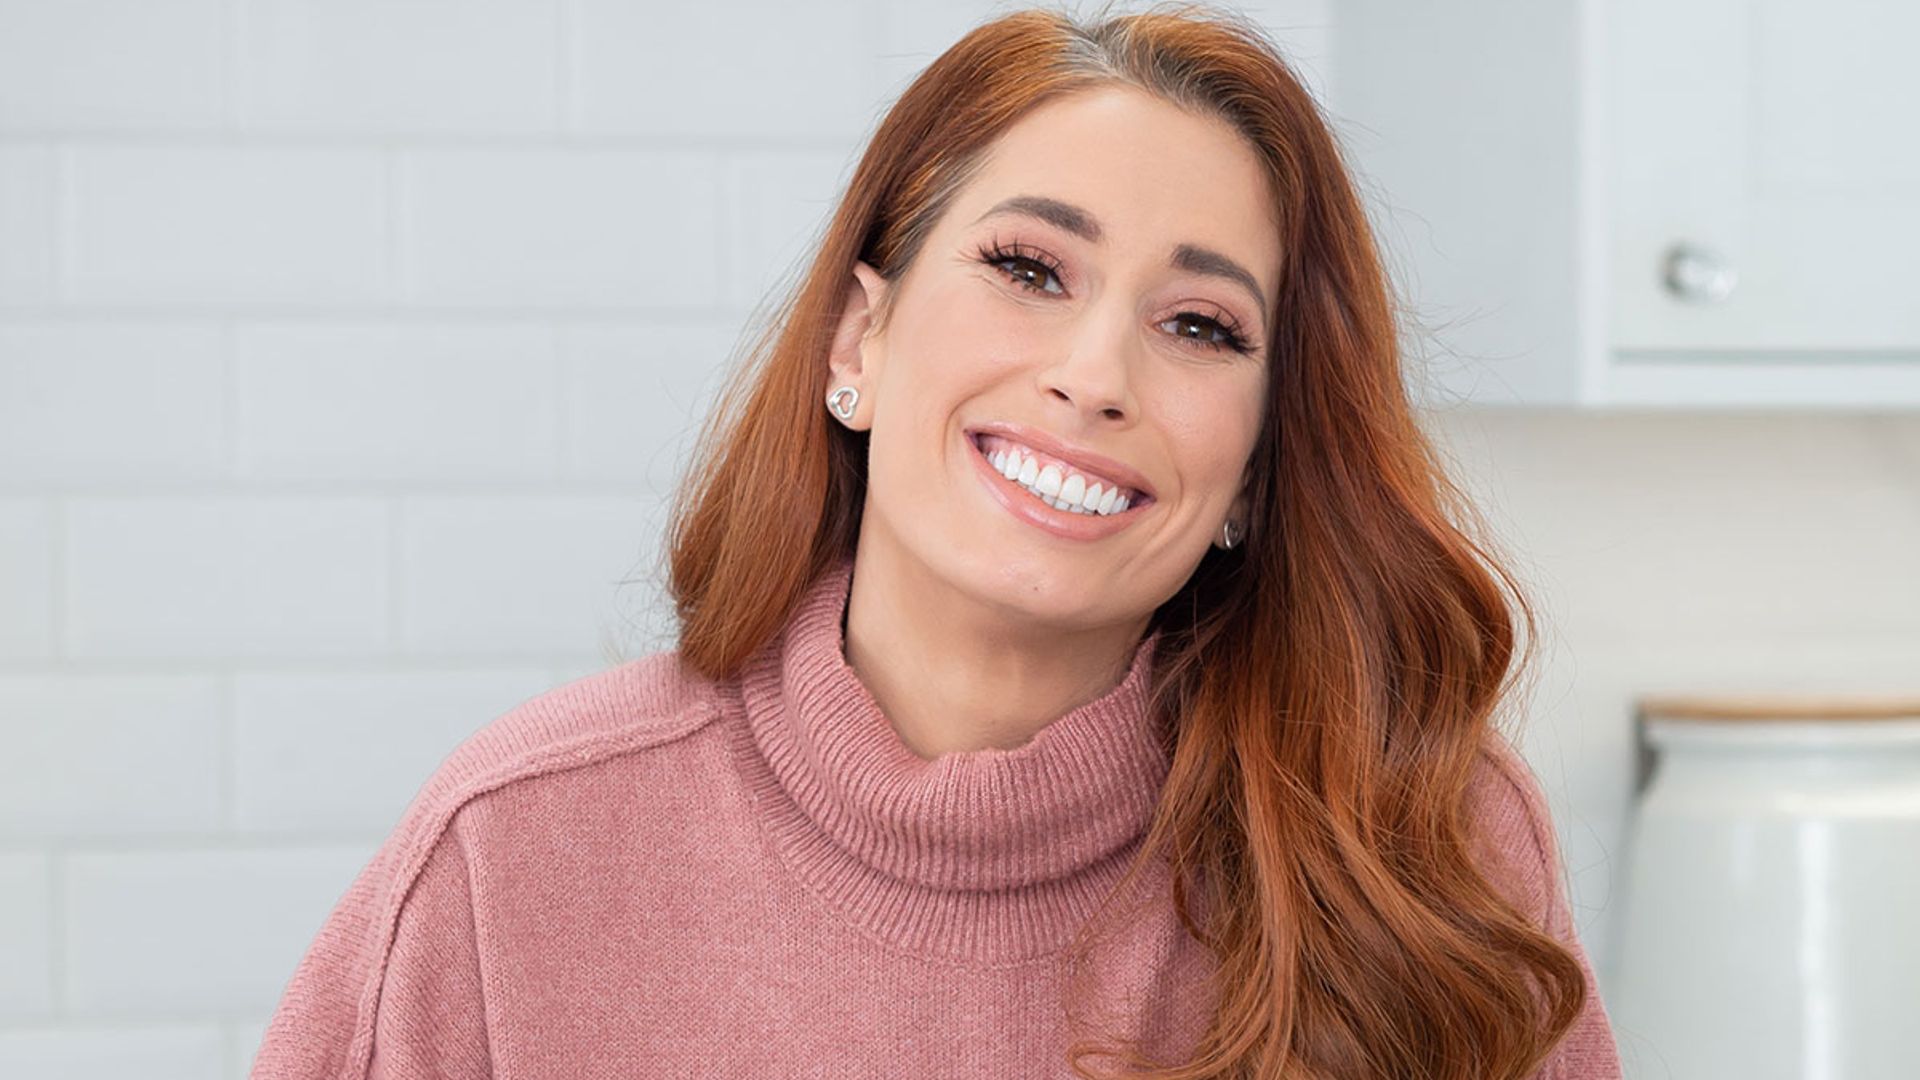 stacey solomon new book